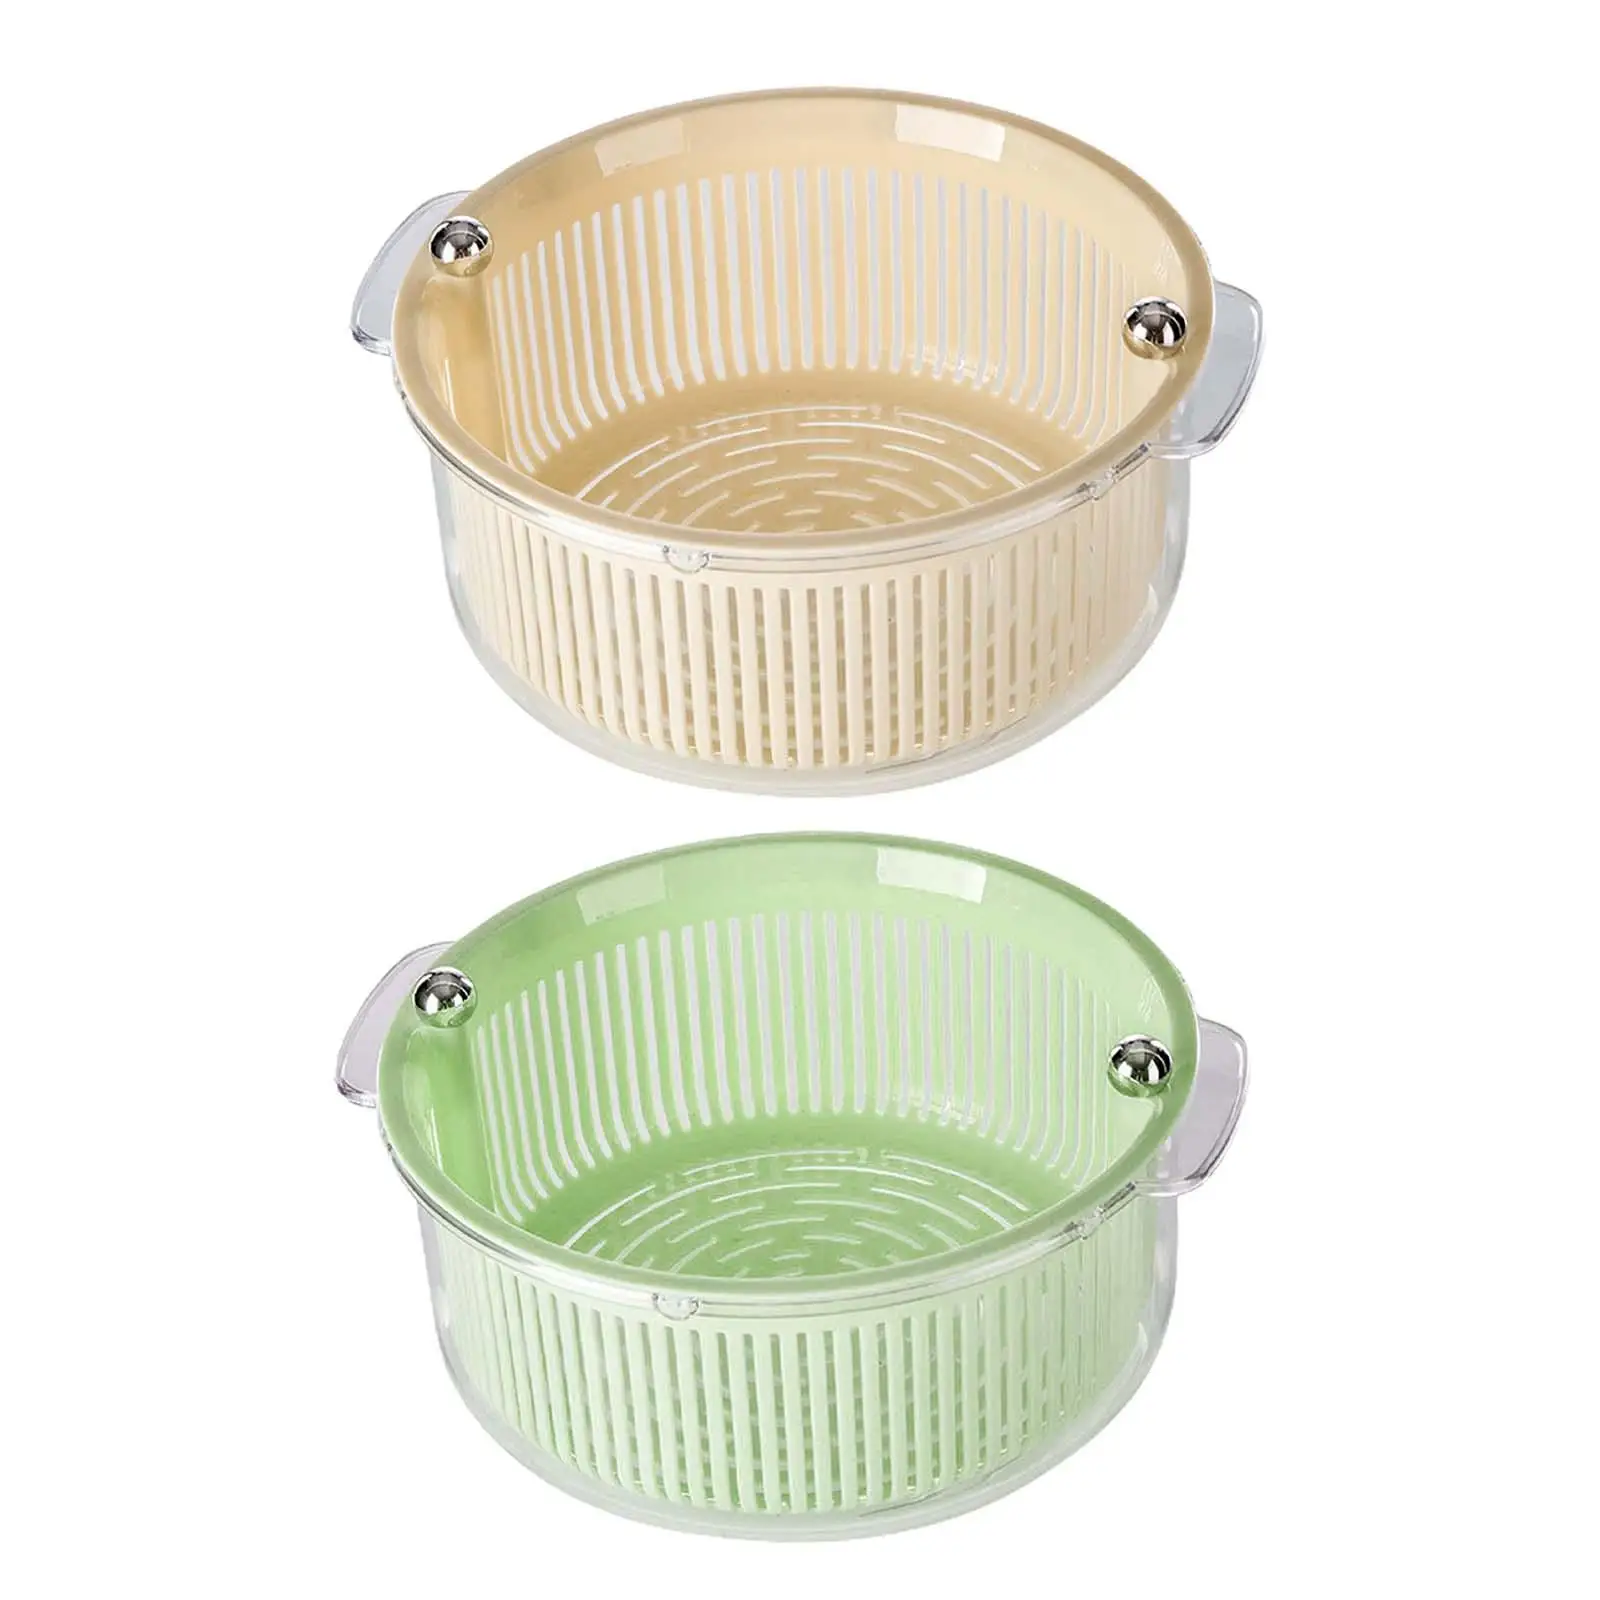 Colander Bowl Strainer 2 in 1 Rotatable Food Strainer Bowl Mixing Bowl Vegetable Washer with Bowl for Draining past Salad